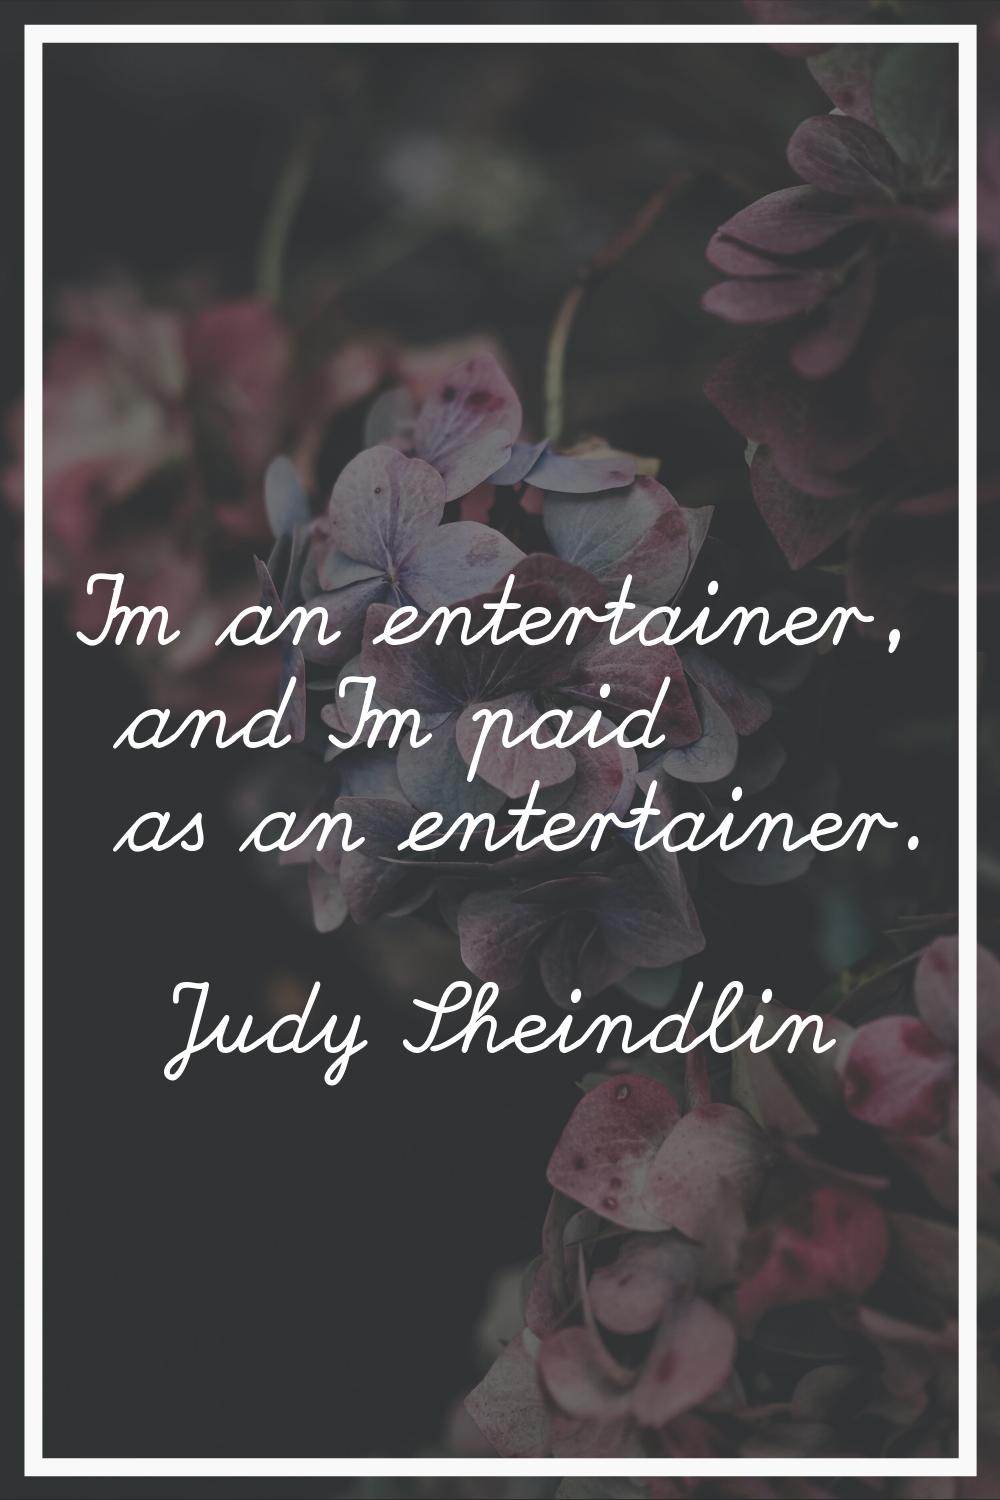 I'm an entertainer, and I'm paid as an entertainer.